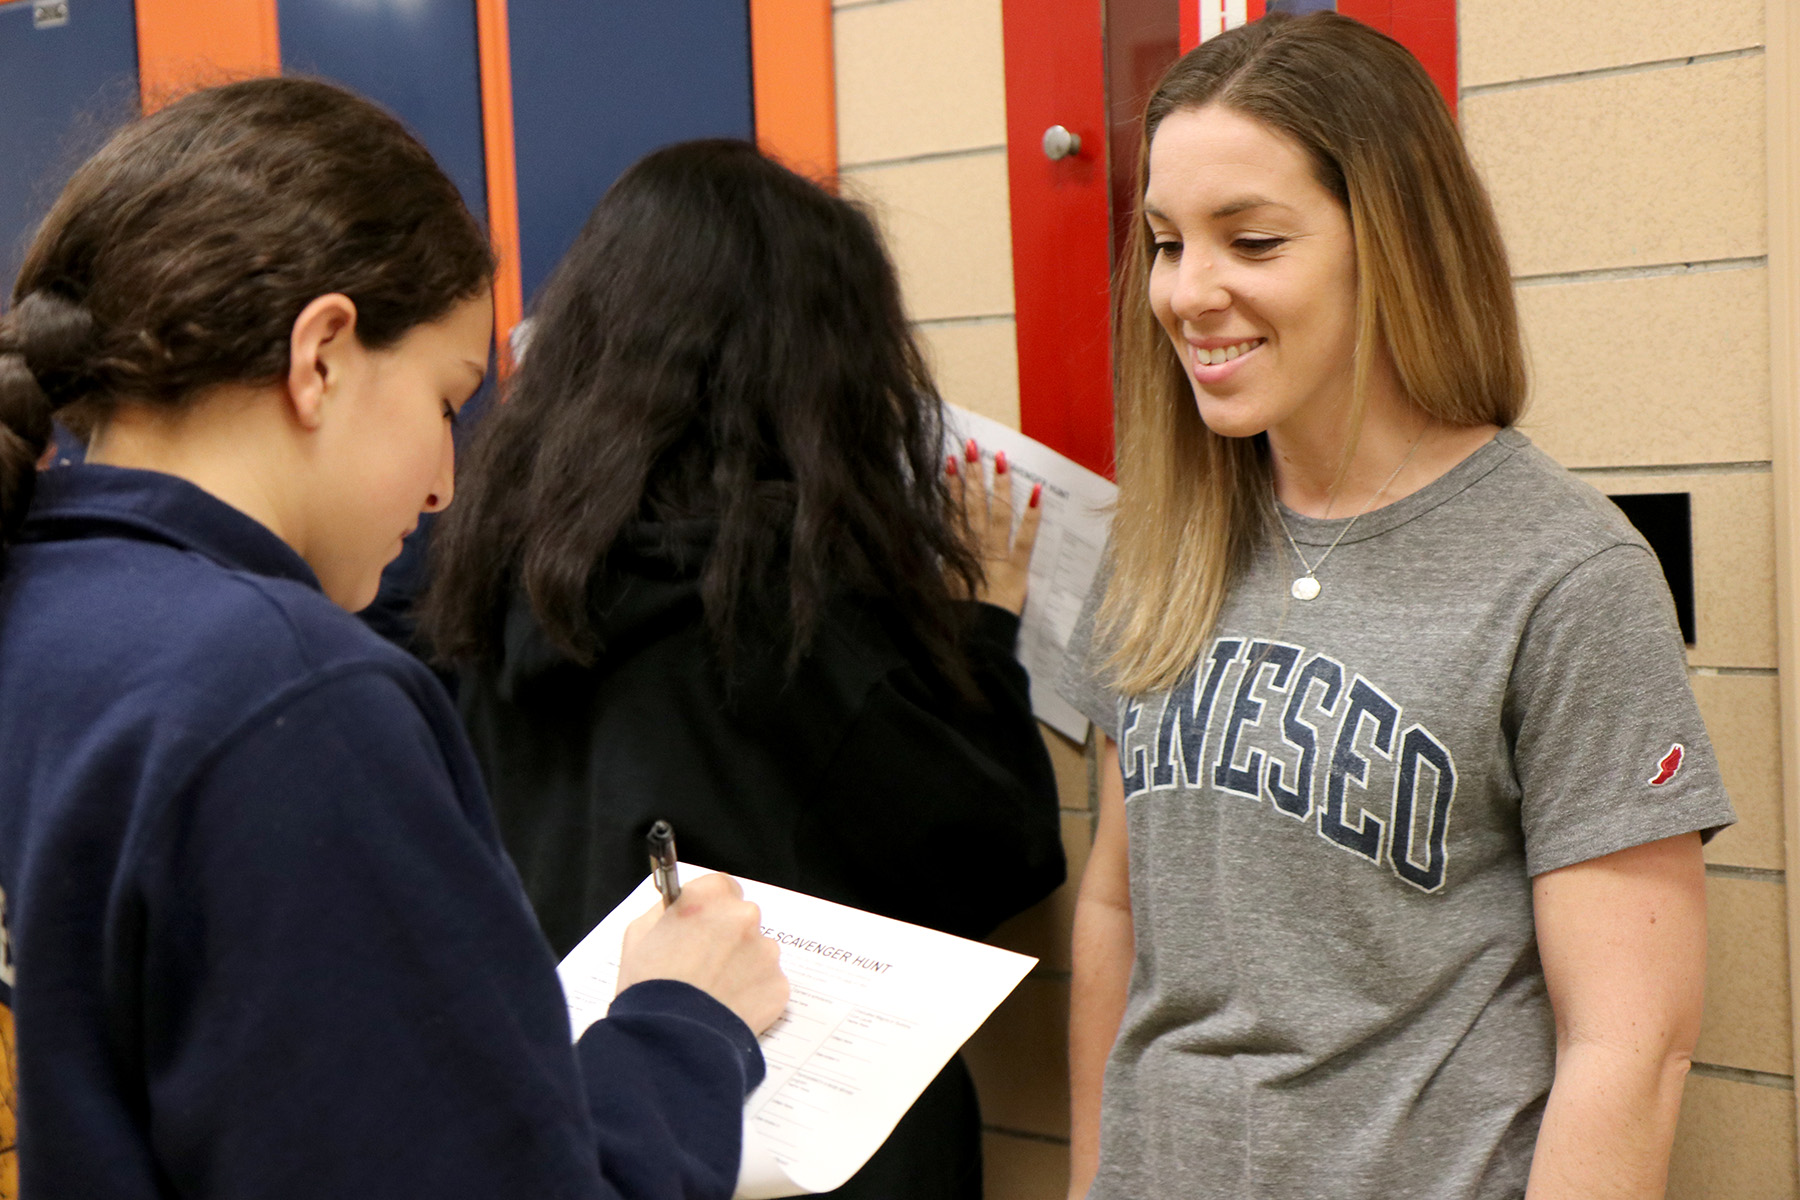 Students sought answers from North Middle School staff members in a 'college scavenger hunt'. (Photo courtesy of the Great Neck Public Schools)